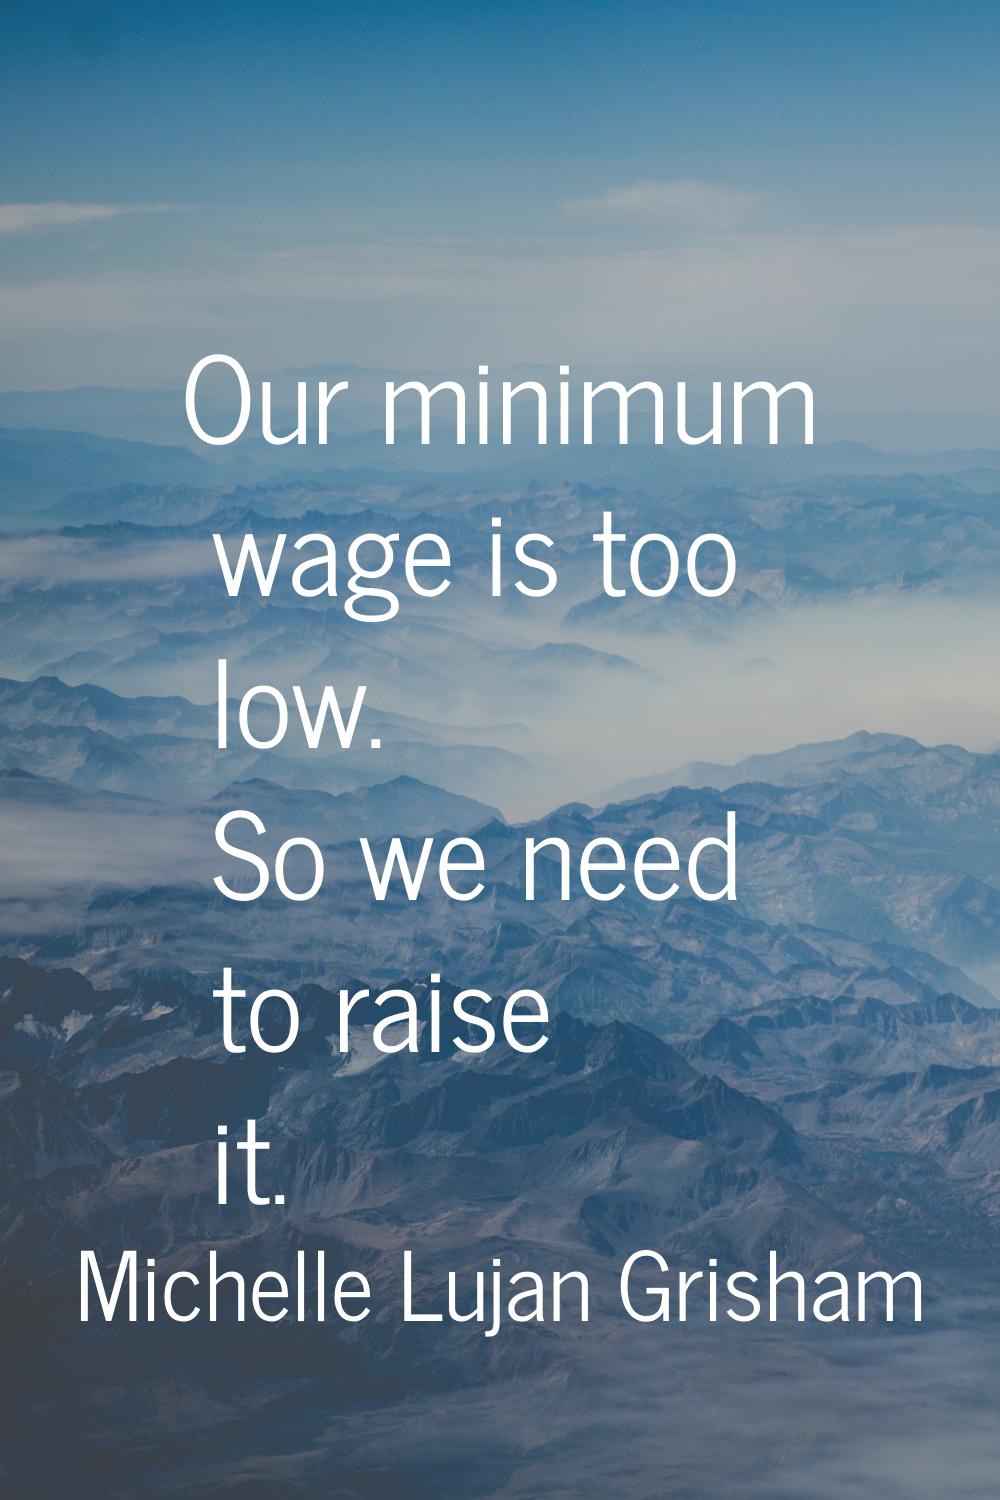 Our minimum wage is too low. So we need to raise it.